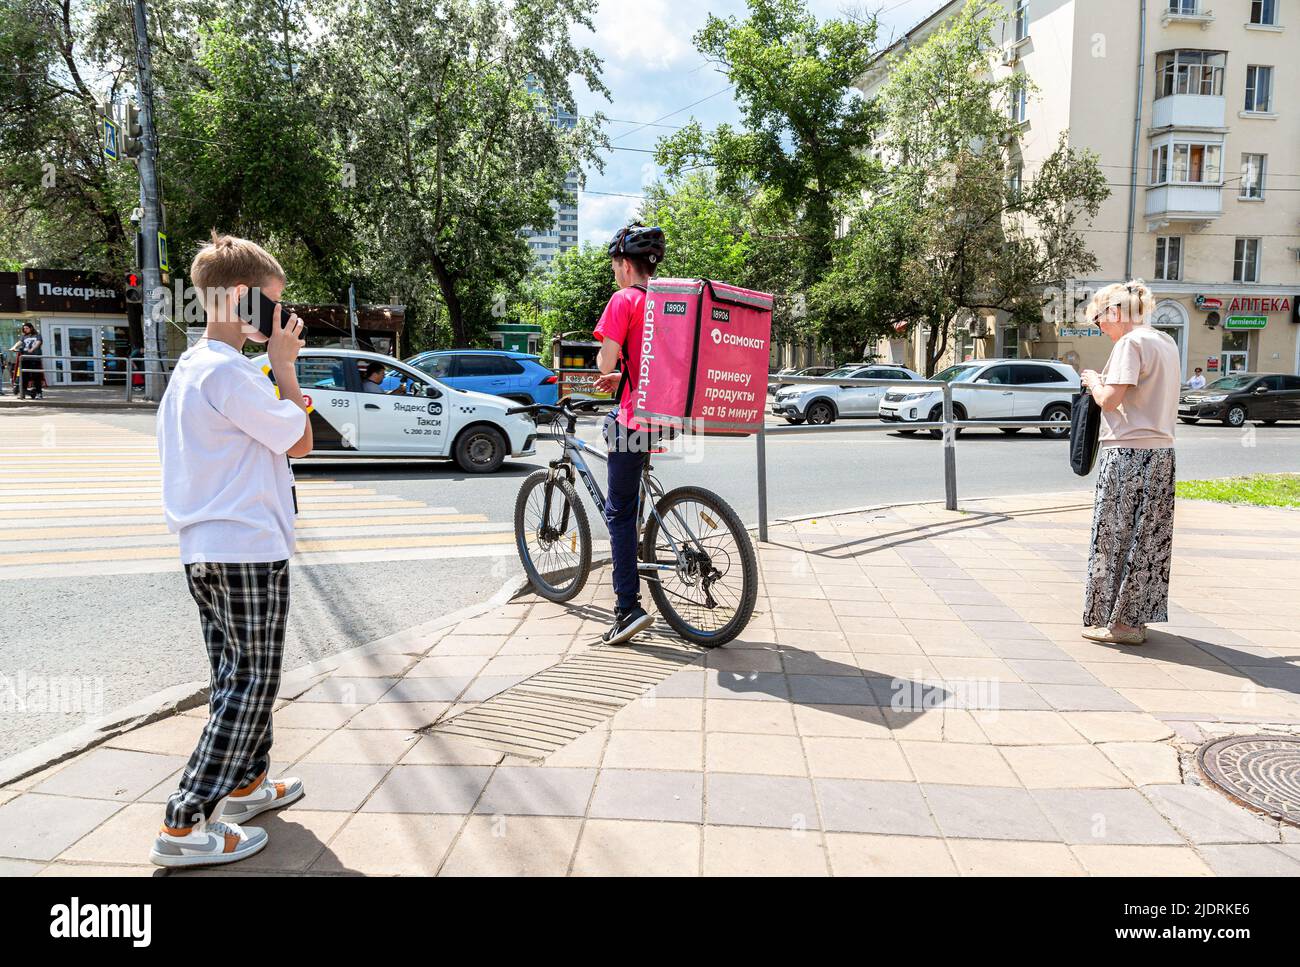 Samara, Russia - June 18, 2022: Courier of Samokat food delivery service on bicycle at the city street Stock Photo